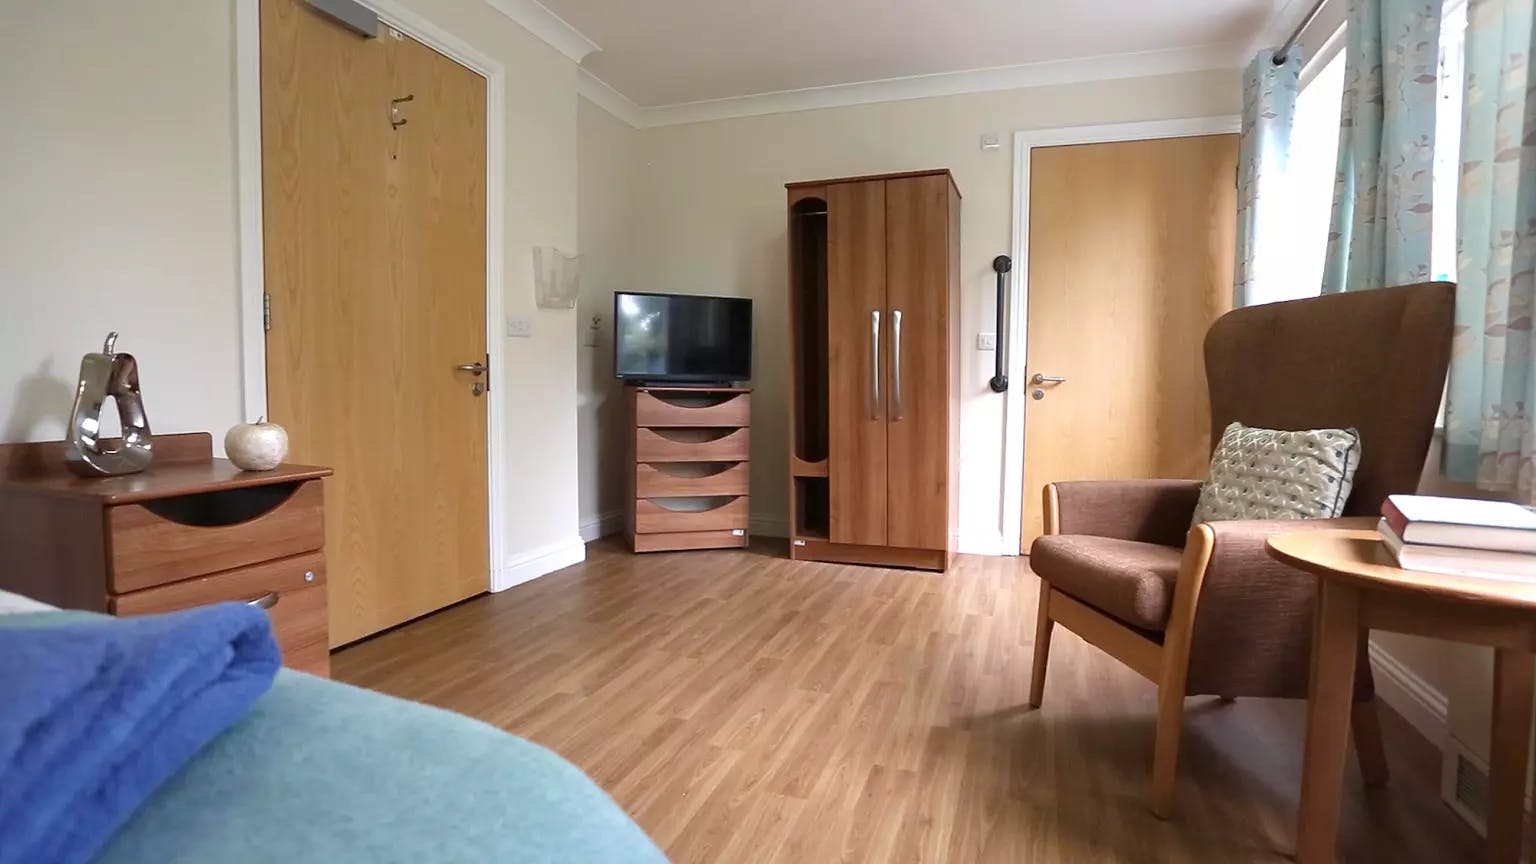 Bedroom of Belmont View care home in Hoddesdon, Hertfordshire